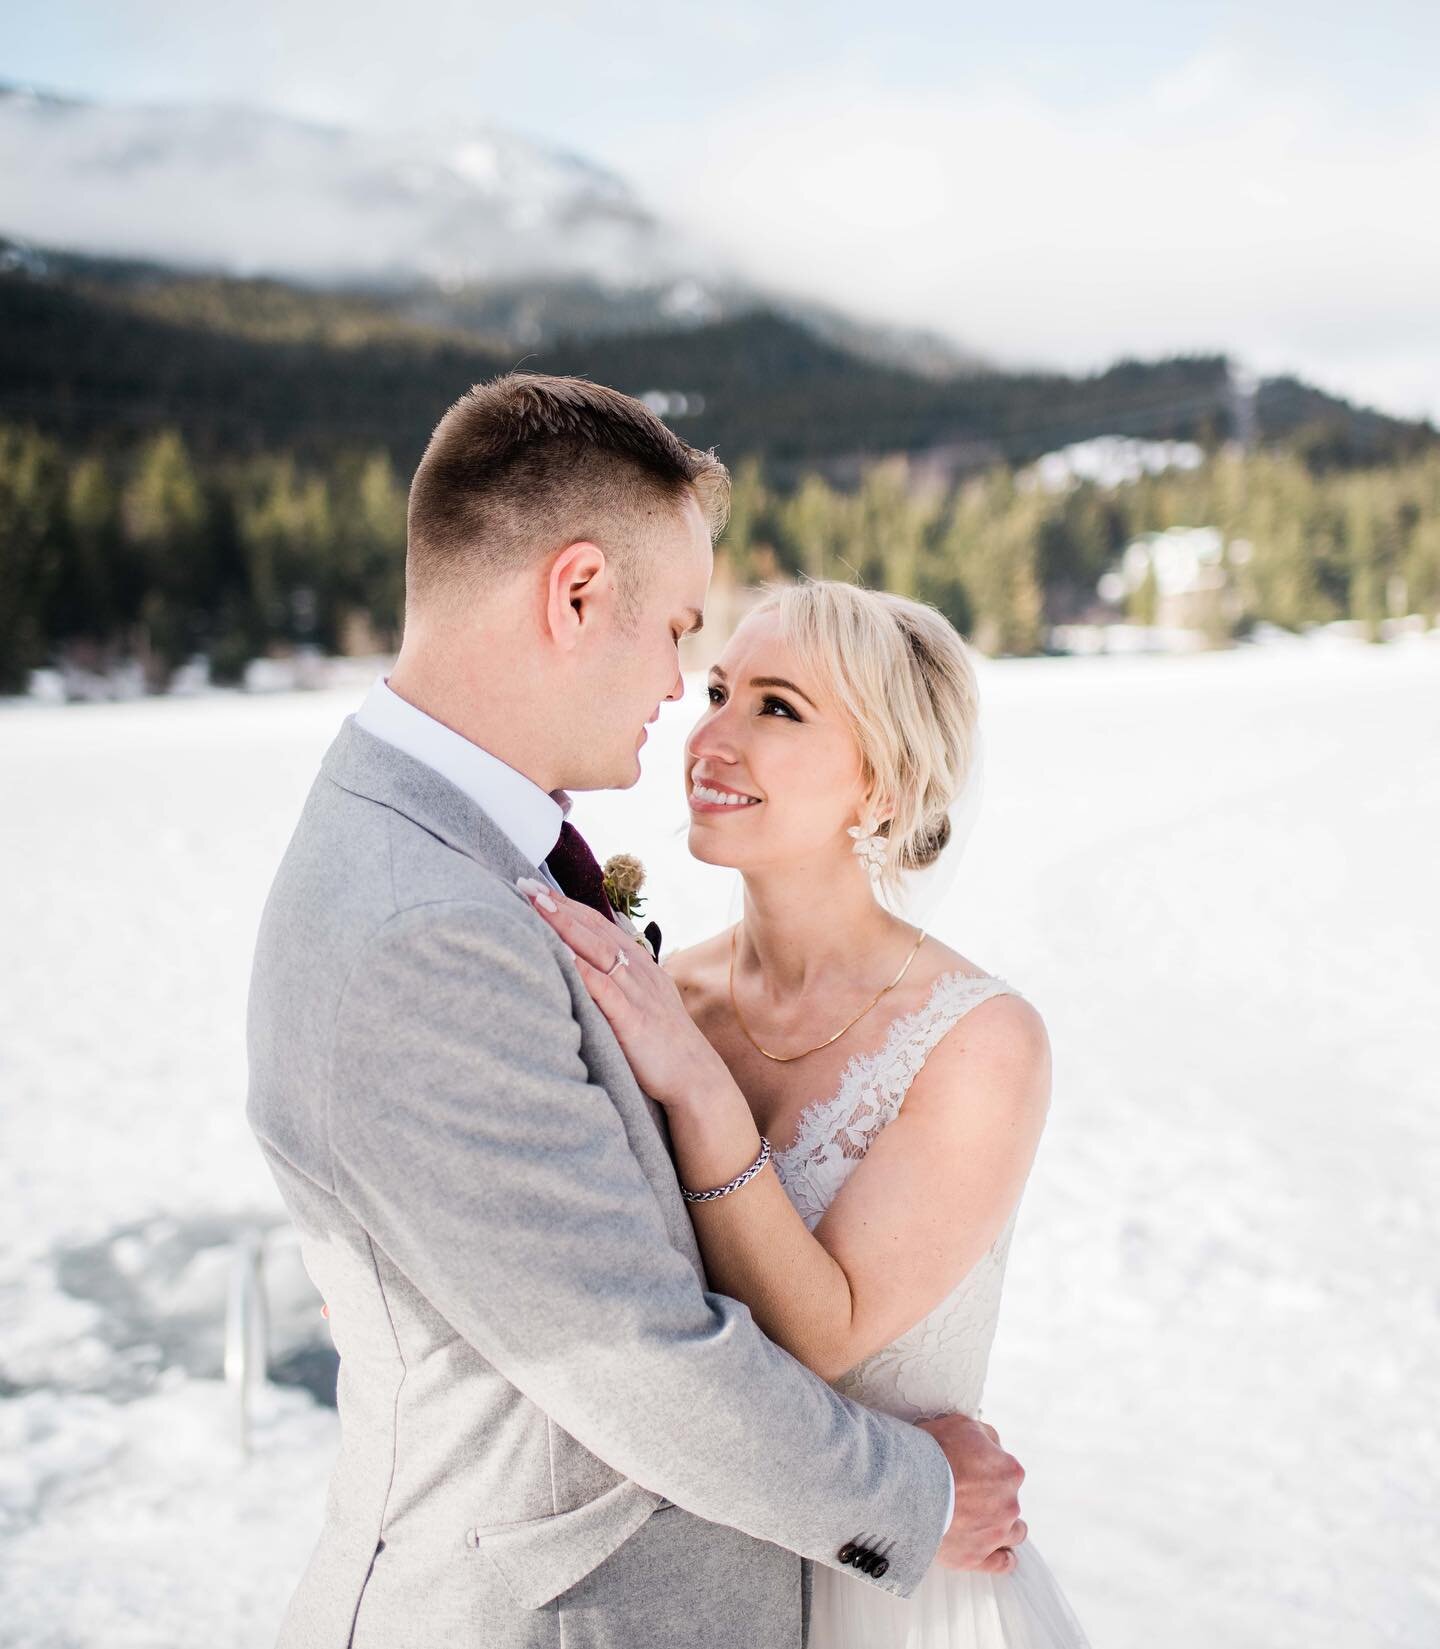 Happy Anniversary to these two! This was the trip of a lifetime. Between skiing the slopes, to eating all the foods, to photographing Kegan and Natalie&rsquo;s wedding day, I&rsquo;m forever thankful I was included. I plan on taking my kiddo here one